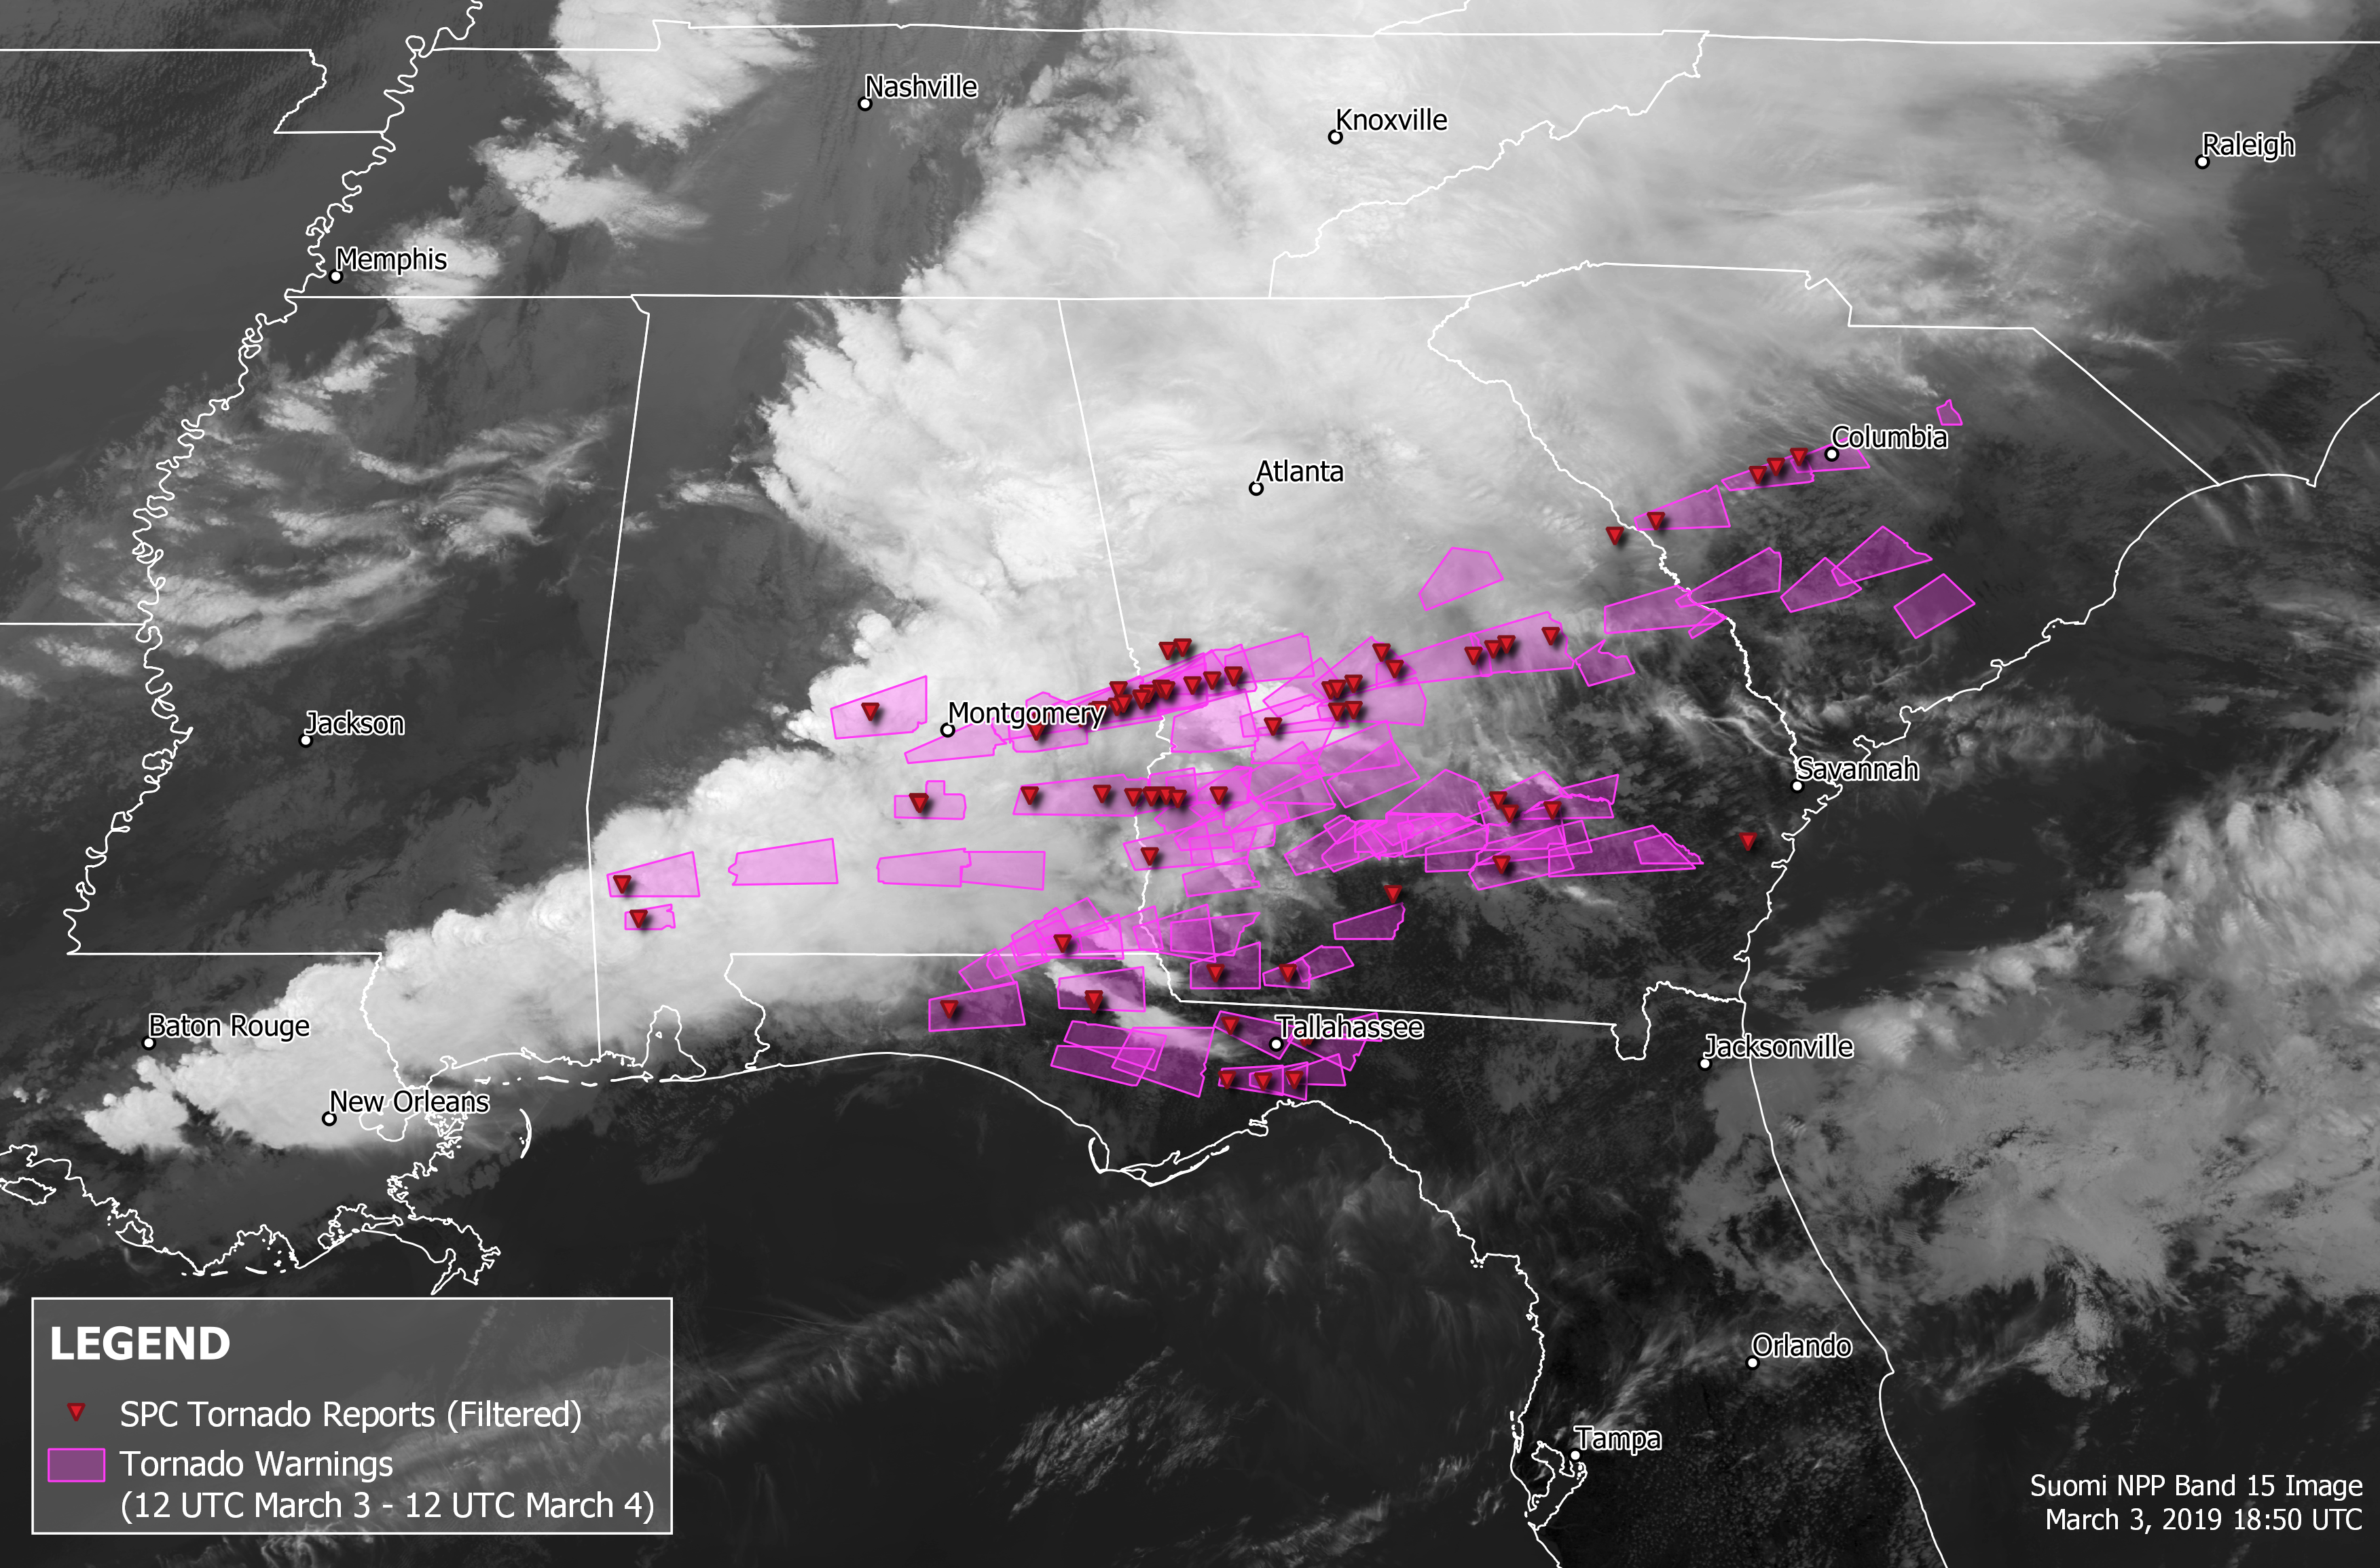 On a black-and-white satellite image of storms over Alabama, tornado warning areas are indicated in pink boxes and tornado reports received by the Storm Prediction Center are indicated with red dots.